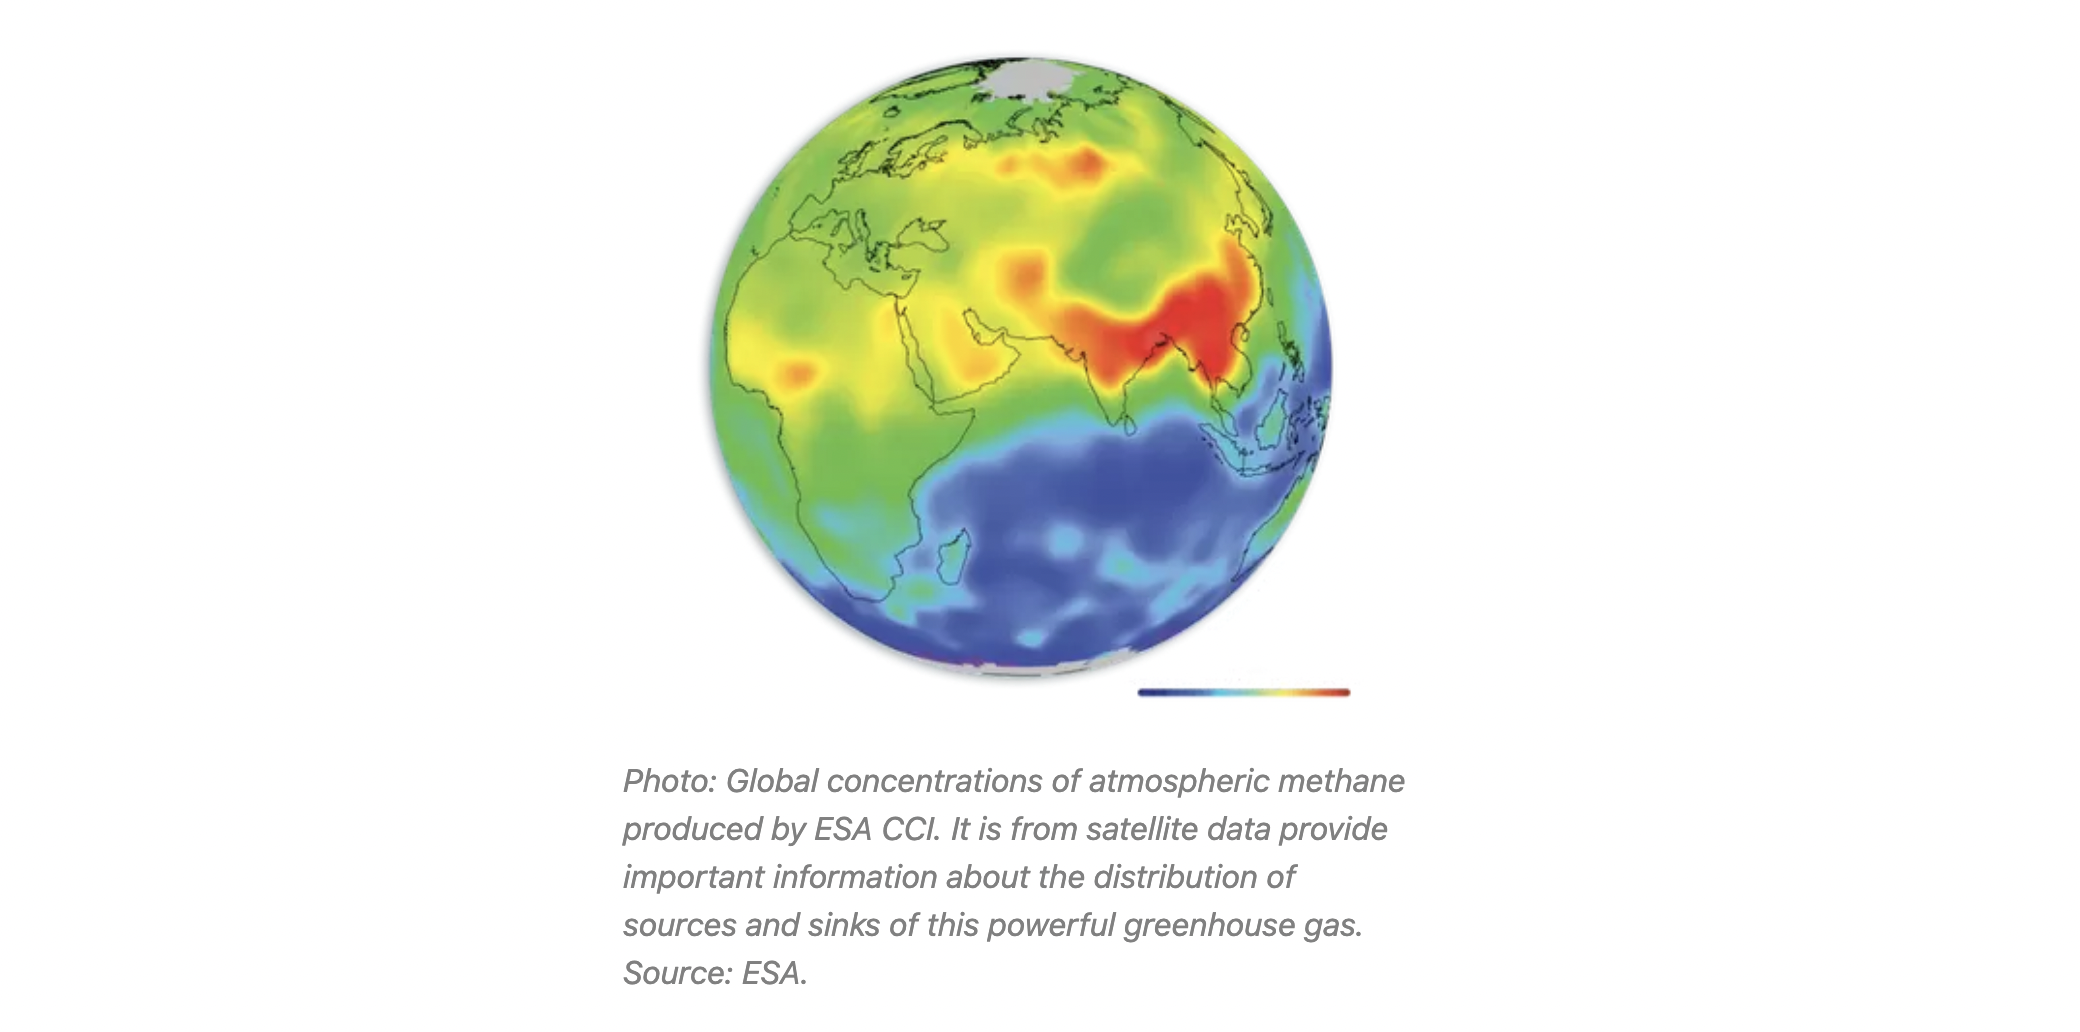 Global concentrations of atmospheric methane